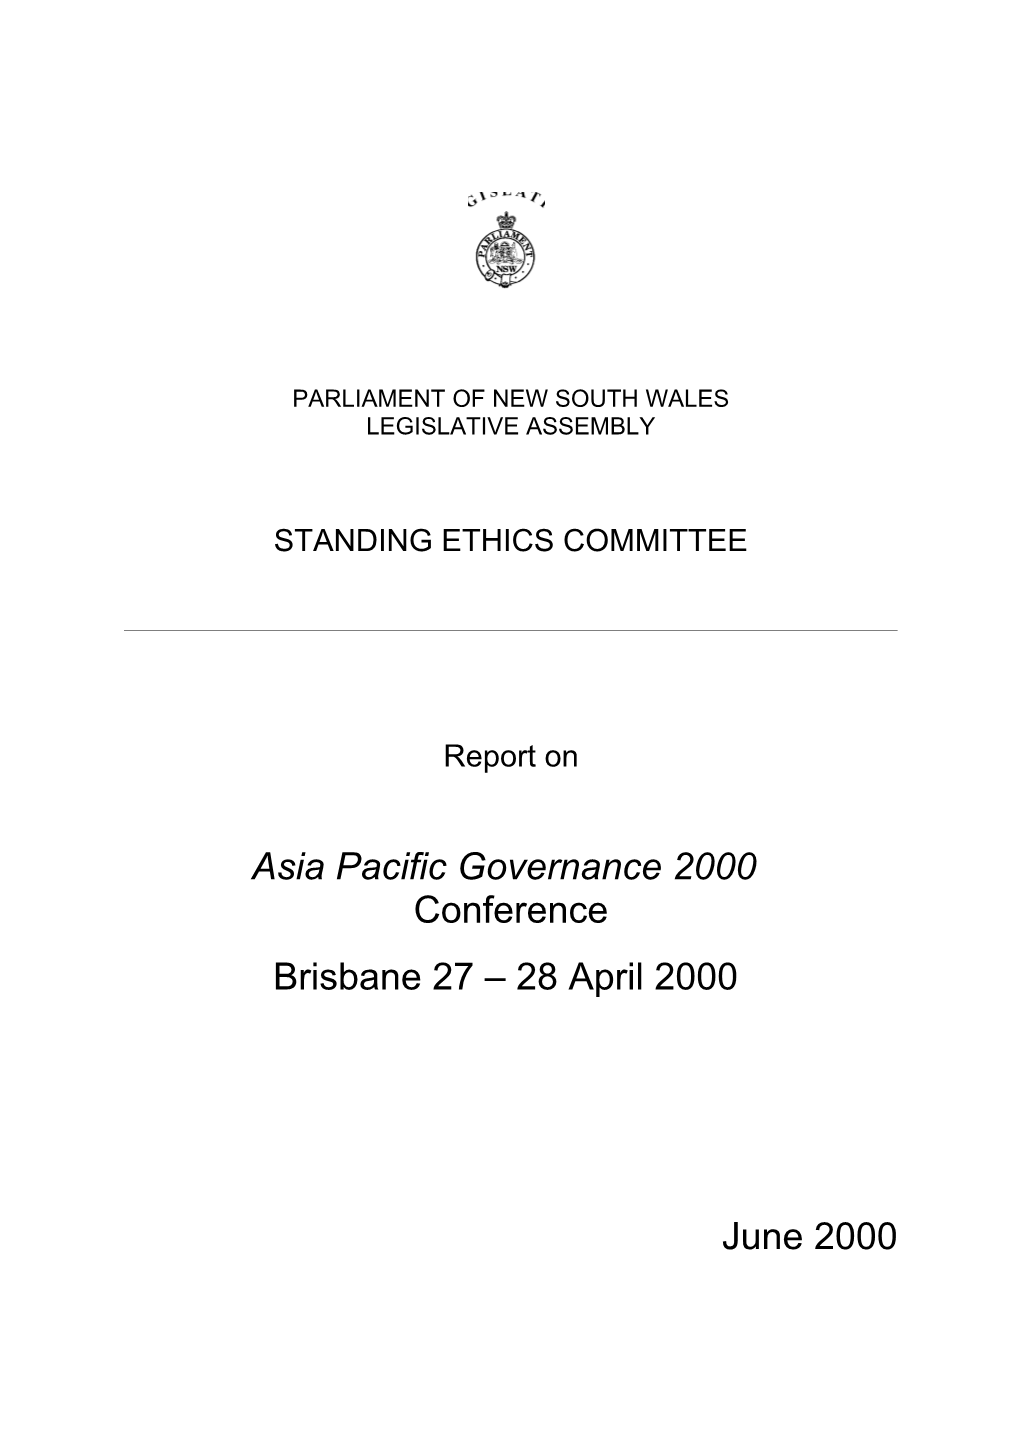 Report on Asia Pacific Governance 2000 Conference